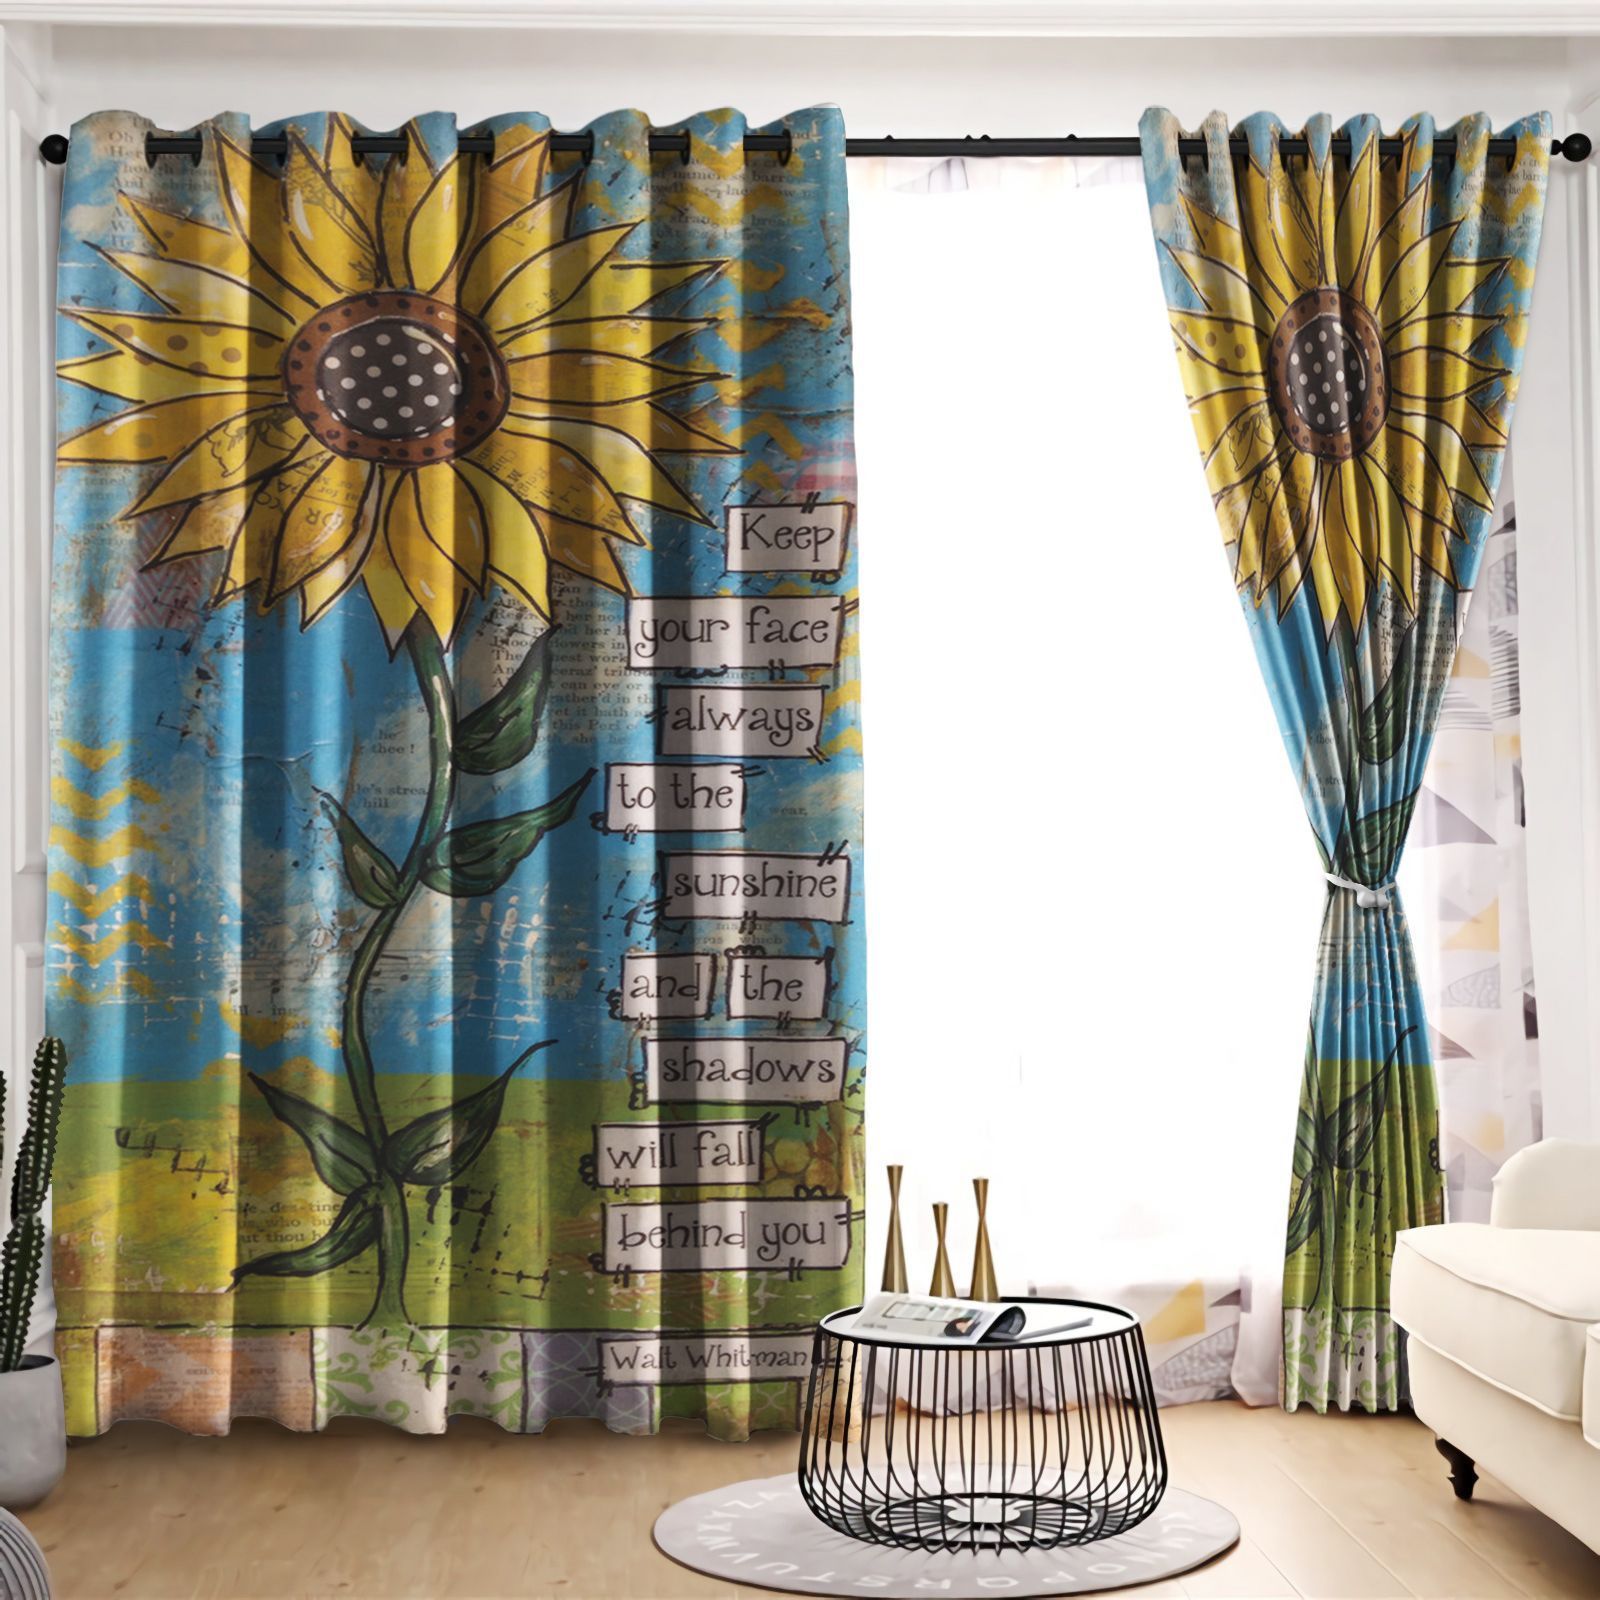 Keep Your Face Always To The Sunshine Sunflower Printed Window Curtain Home Decor